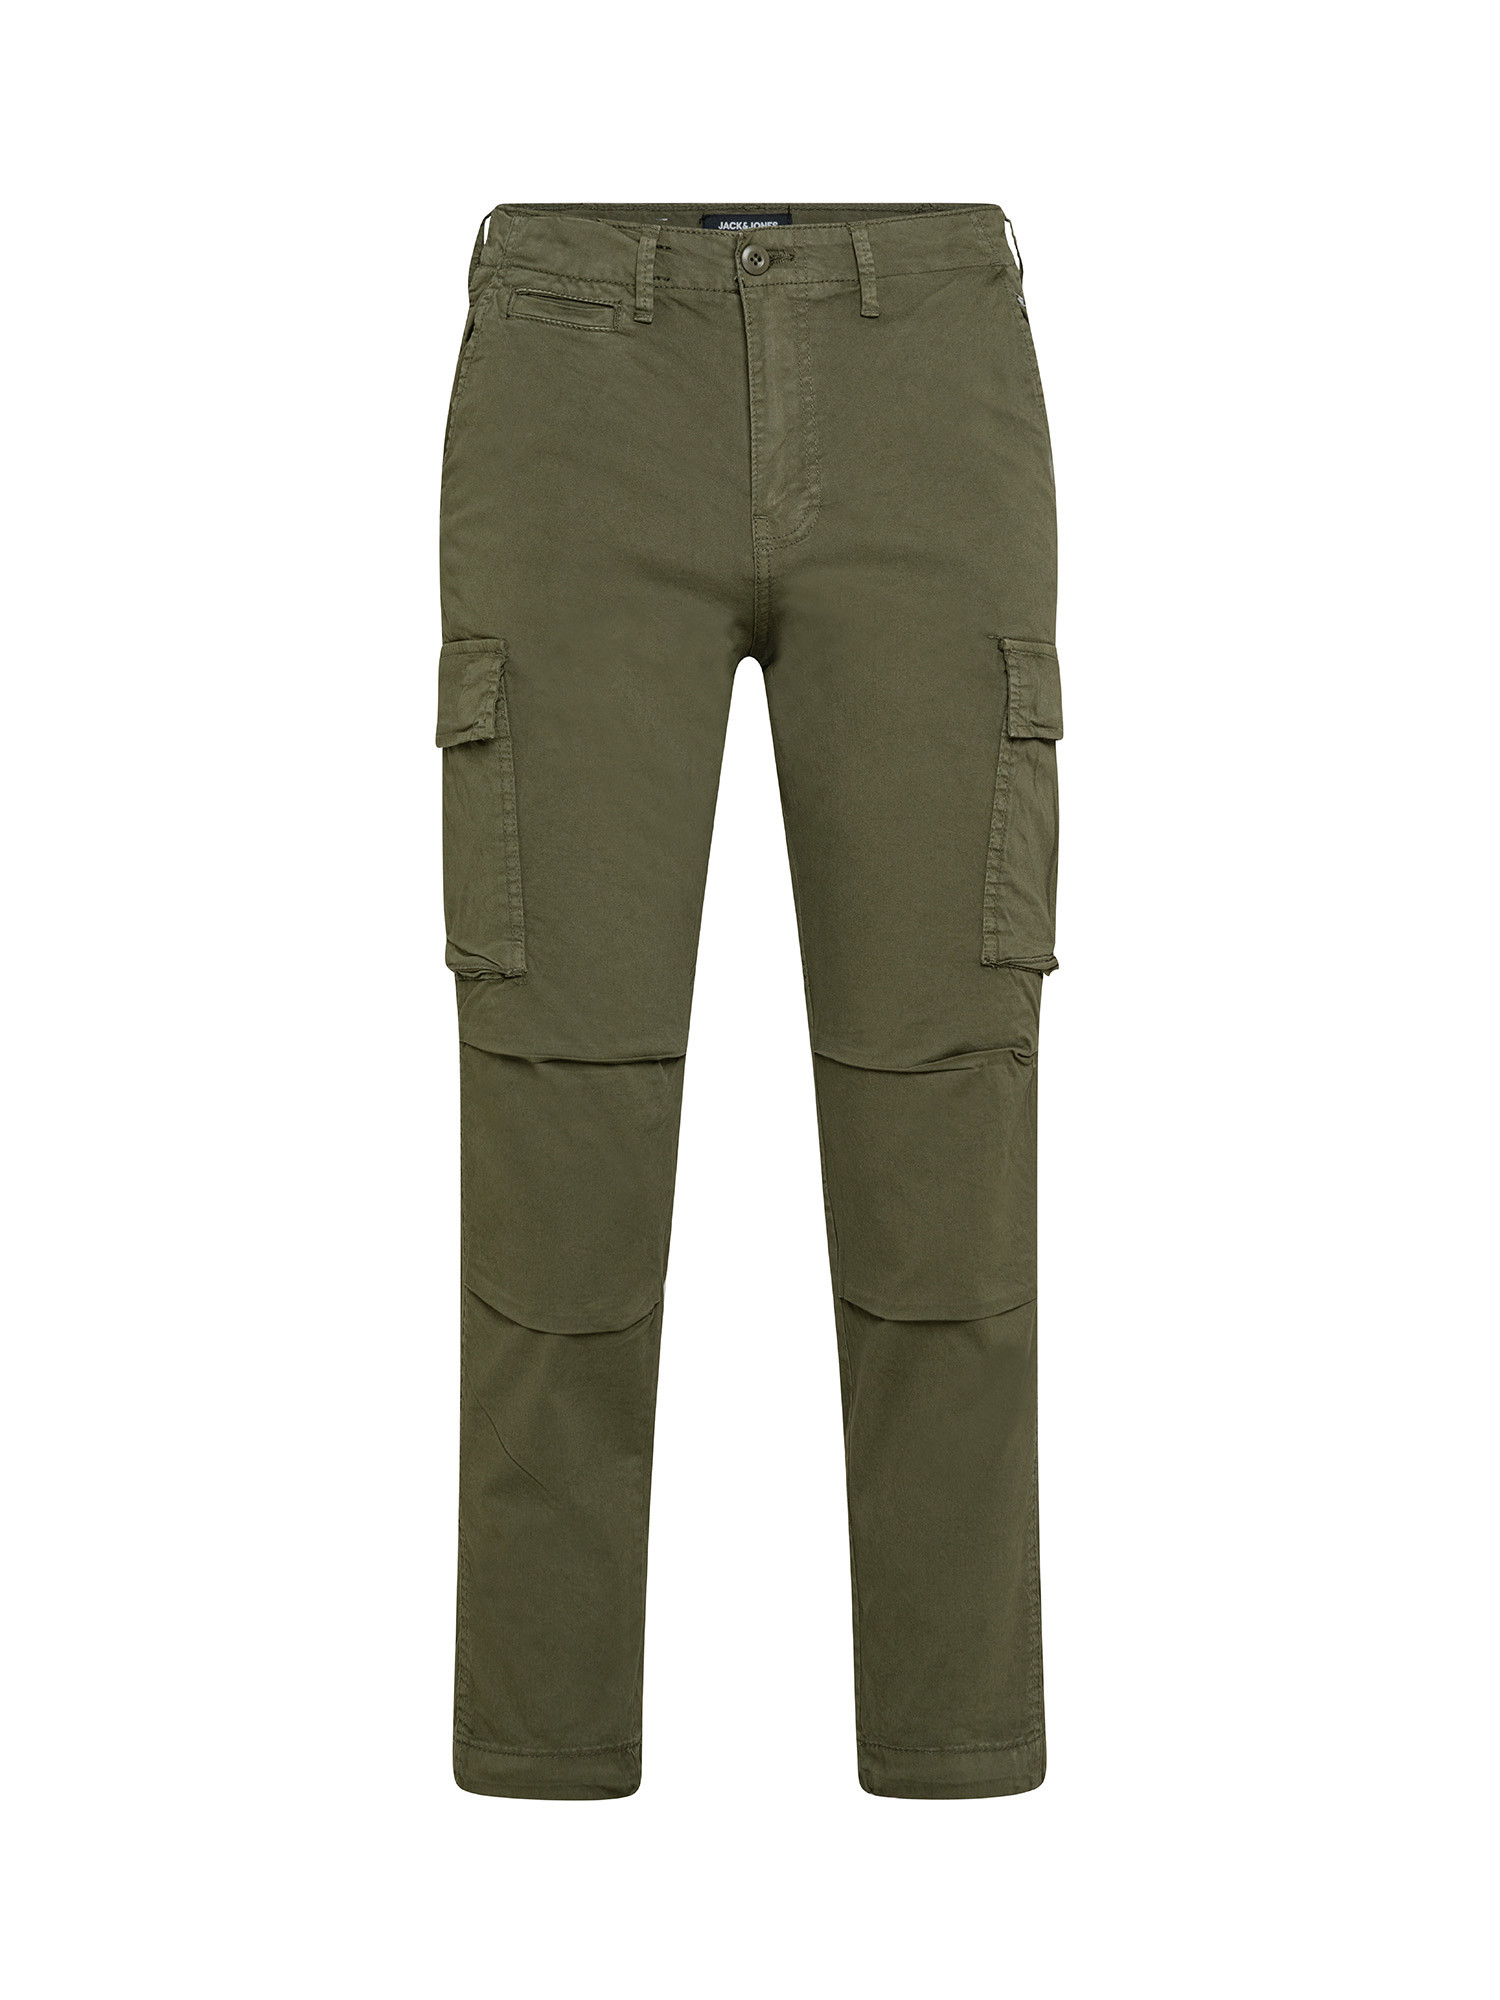 Cargo pants with side pockets, Green, large image number 0